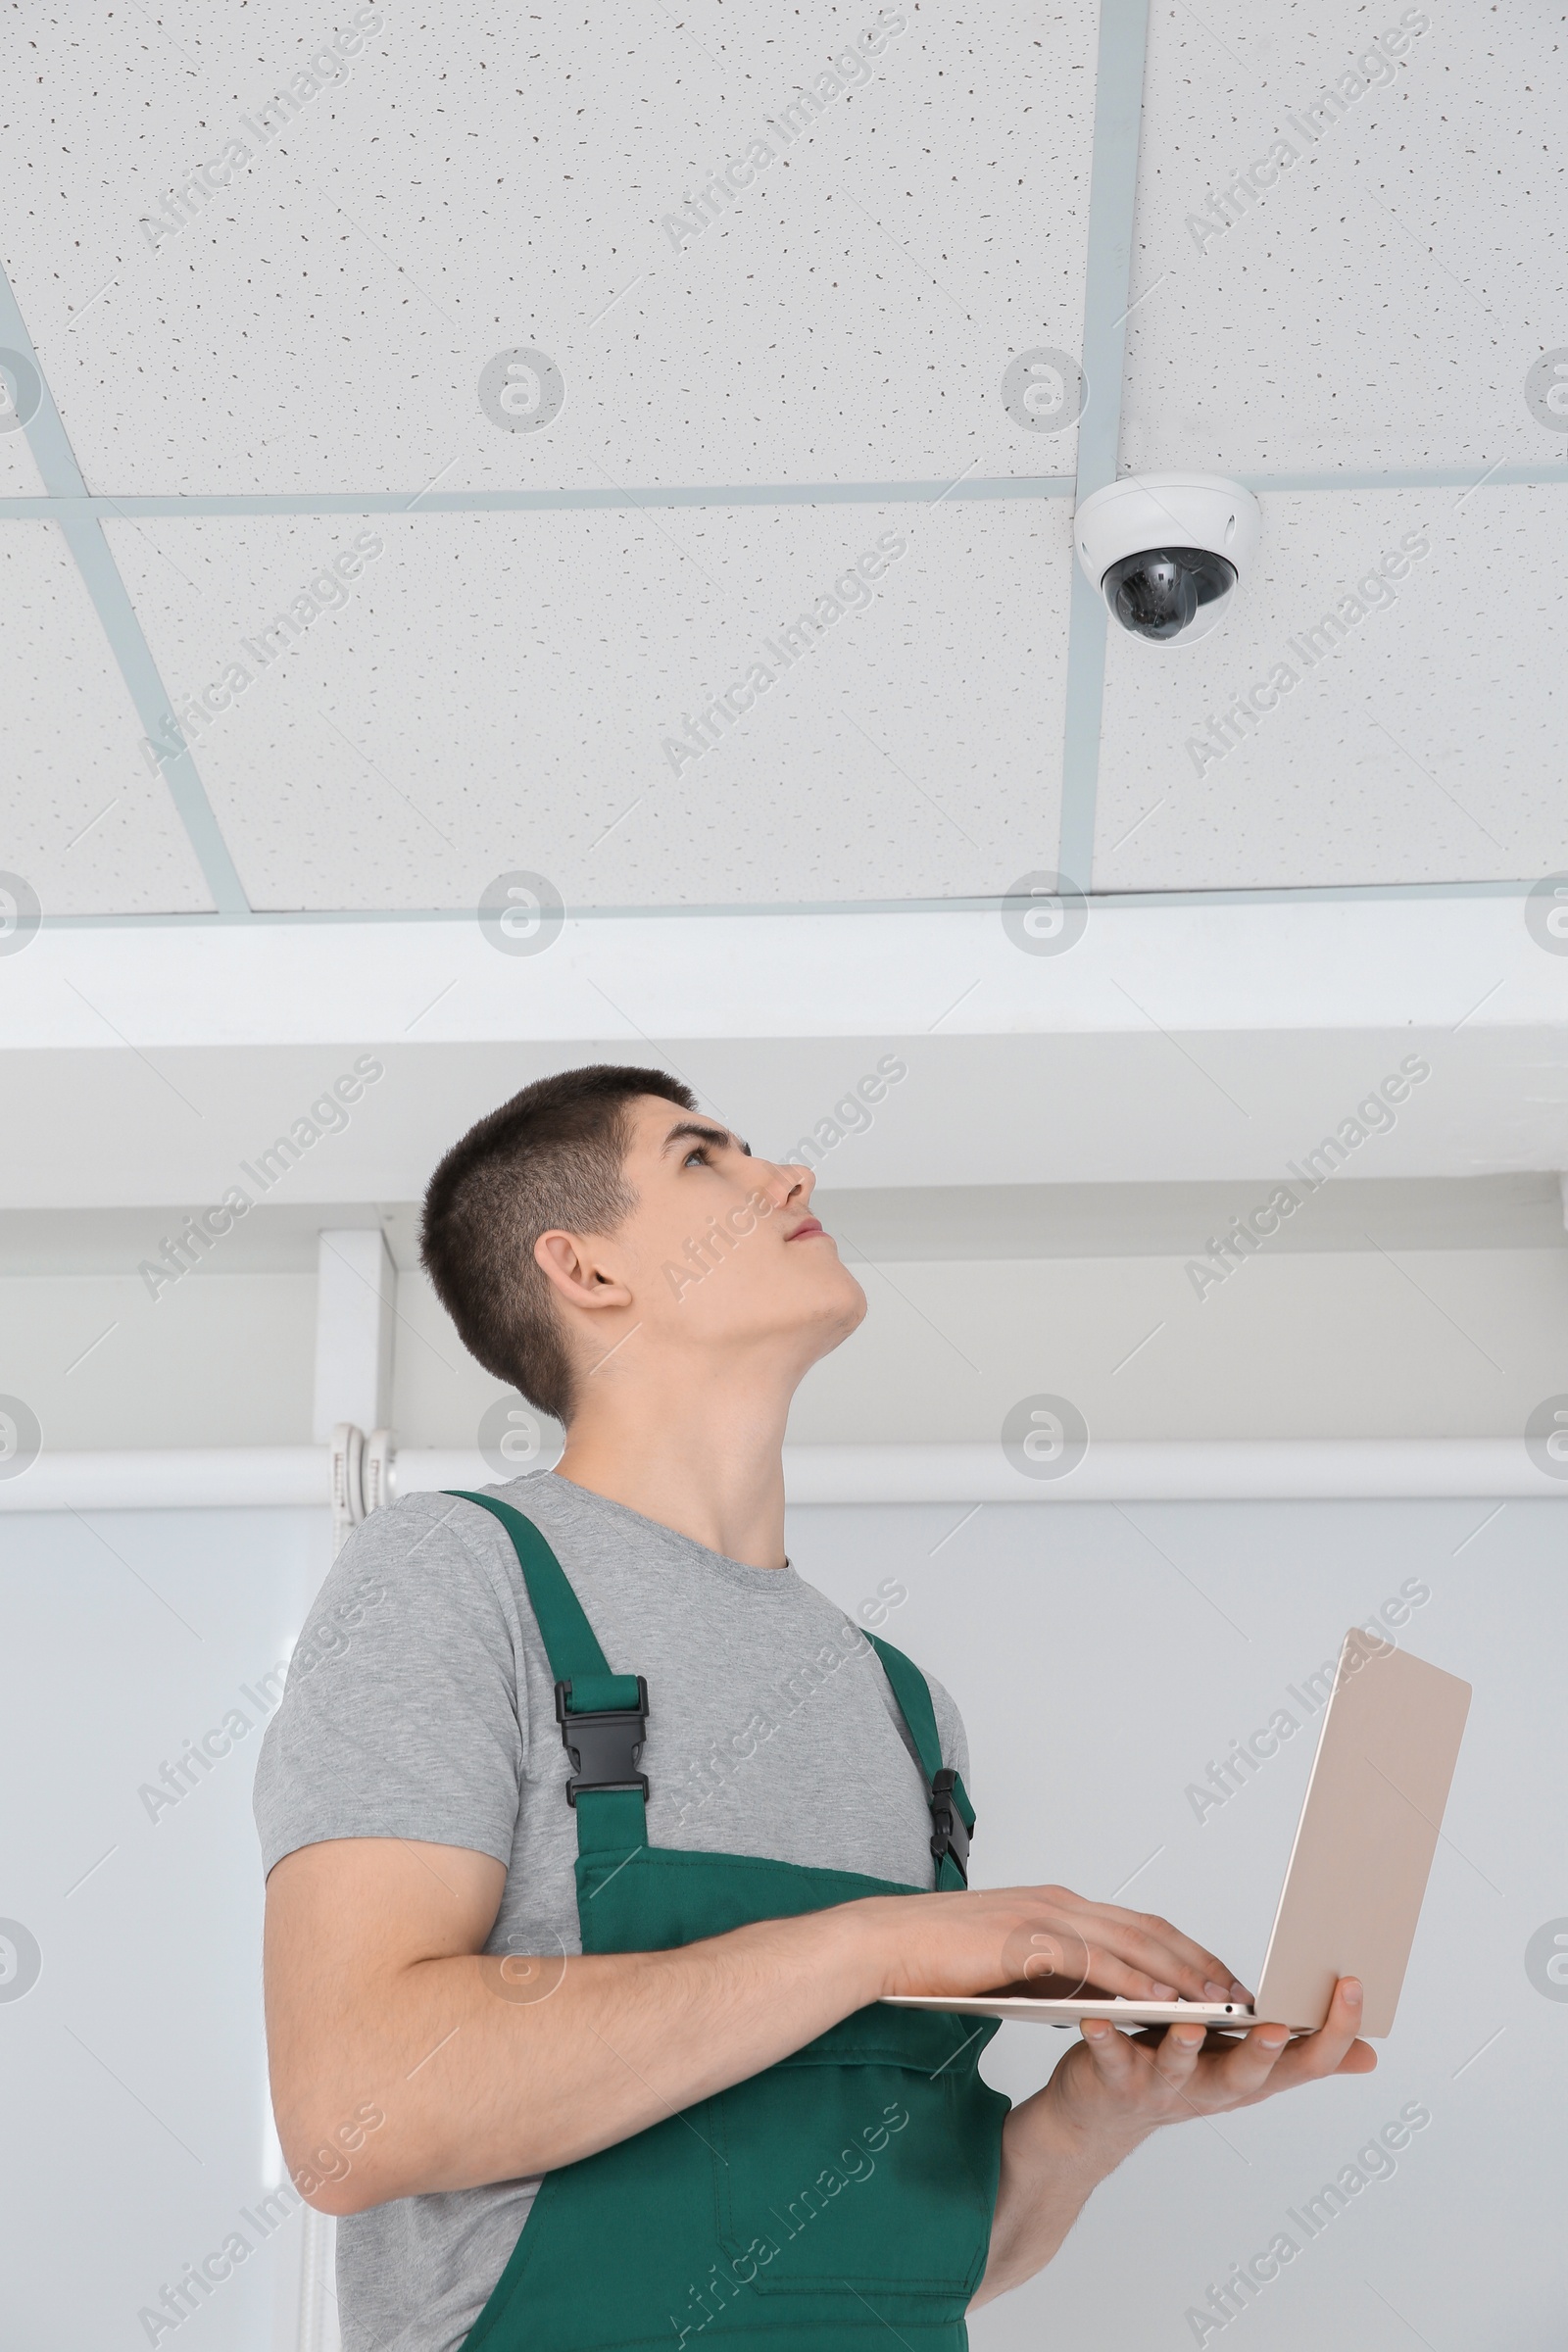 Photo of Technician with laptop installing CCTV camera on ceiling indoors, low angle view